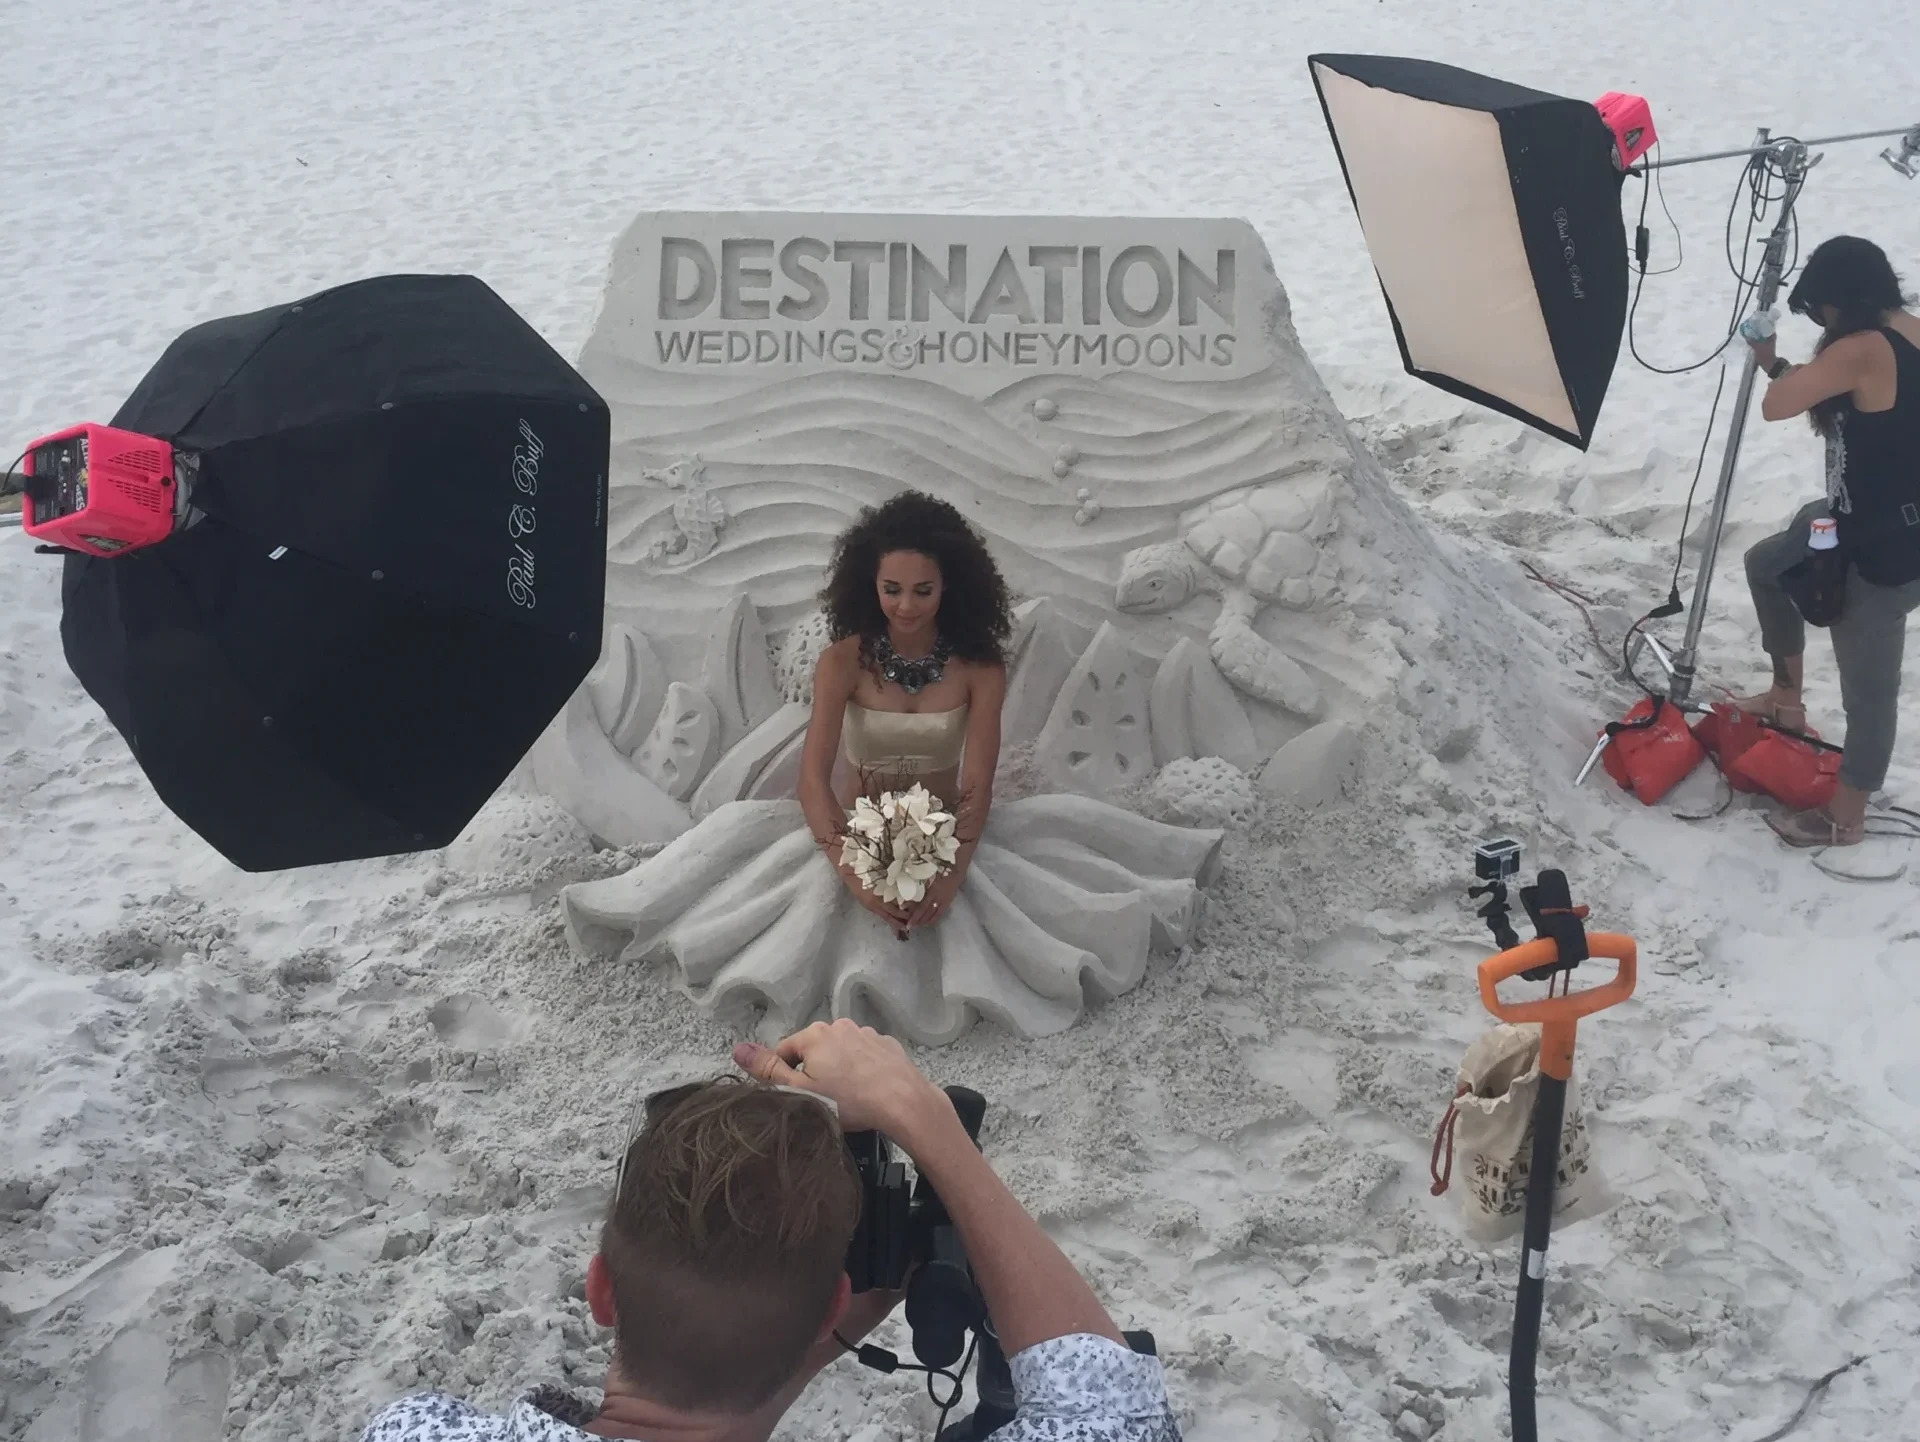 A photo of a professional photo shoot in front of a sand sculpture. The model is a woman who is sitting on the beach, her legs covered in sand, sculpted to look like a skirt. There are box lights and a photographer in the periphery of the photo. The background sand sculpture is a budget friendly flat underwater seascape with a turtle and a sea horse reading “Destination weddings and honeymoons" at the top.